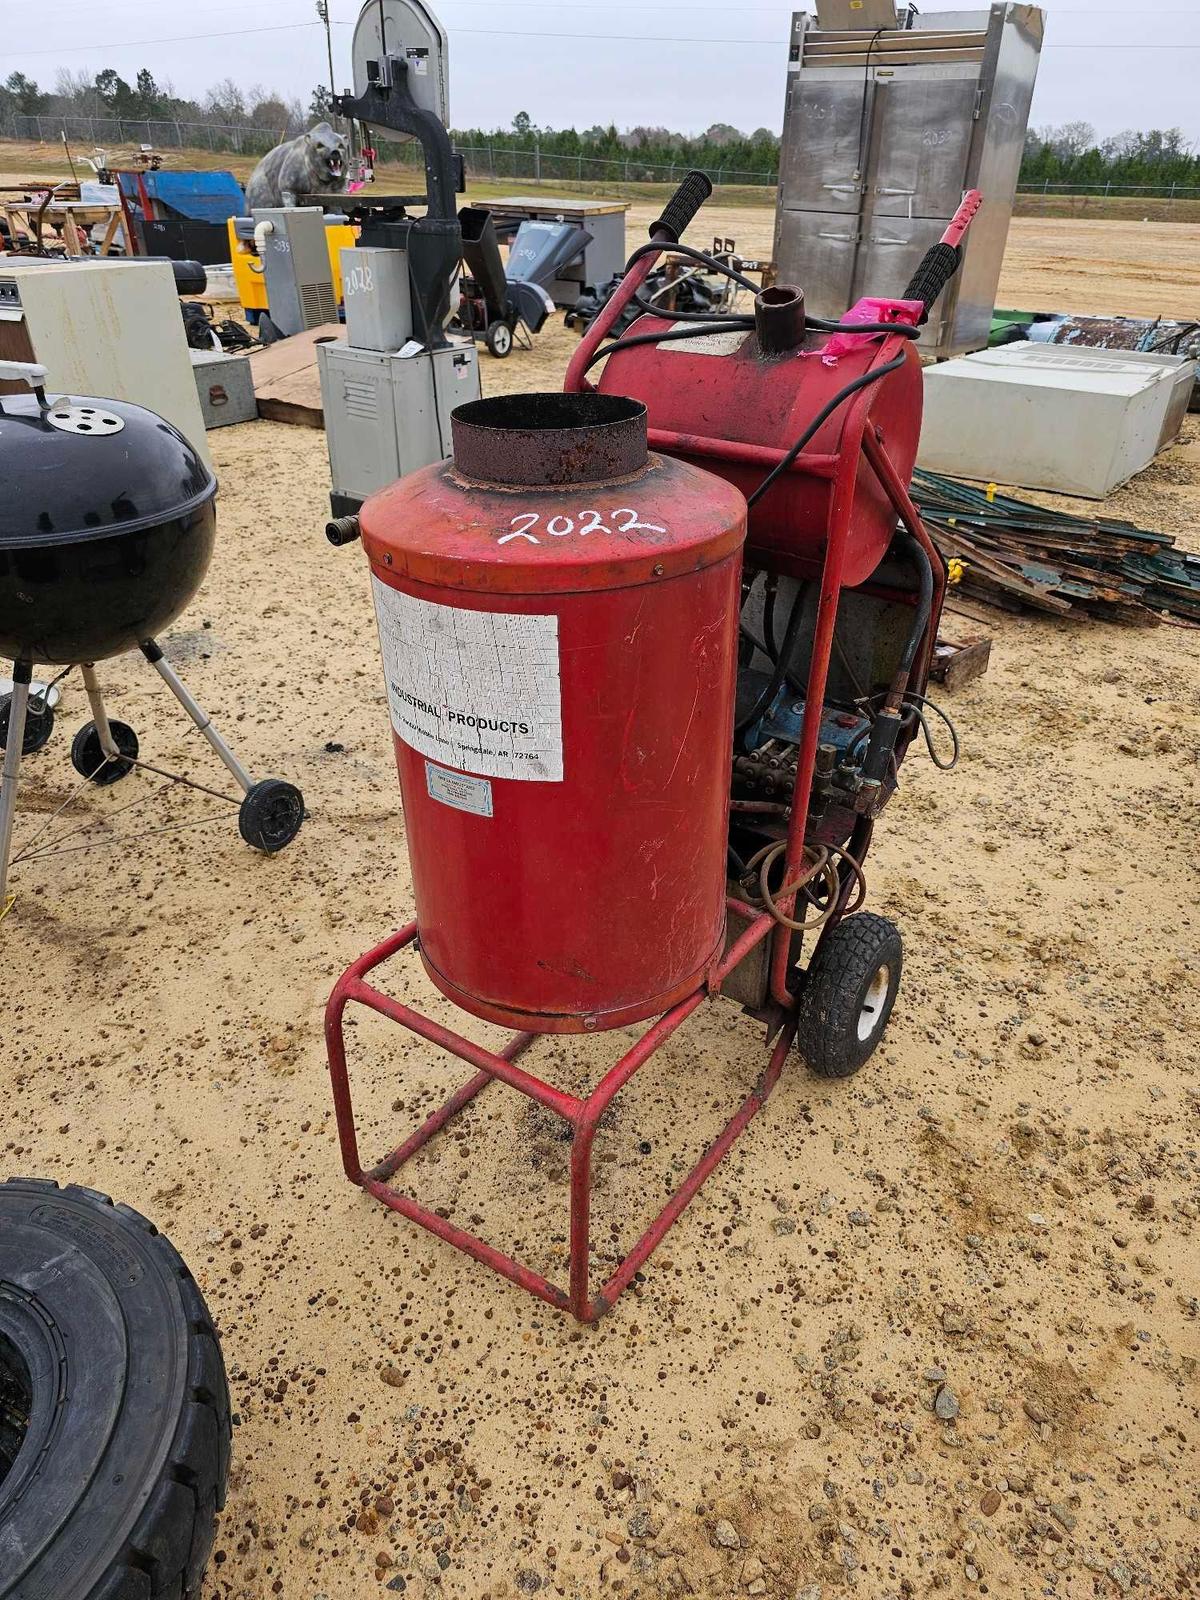 2022 - OMEGA ELECTRIC HOT WATER PRESSURE WASHER